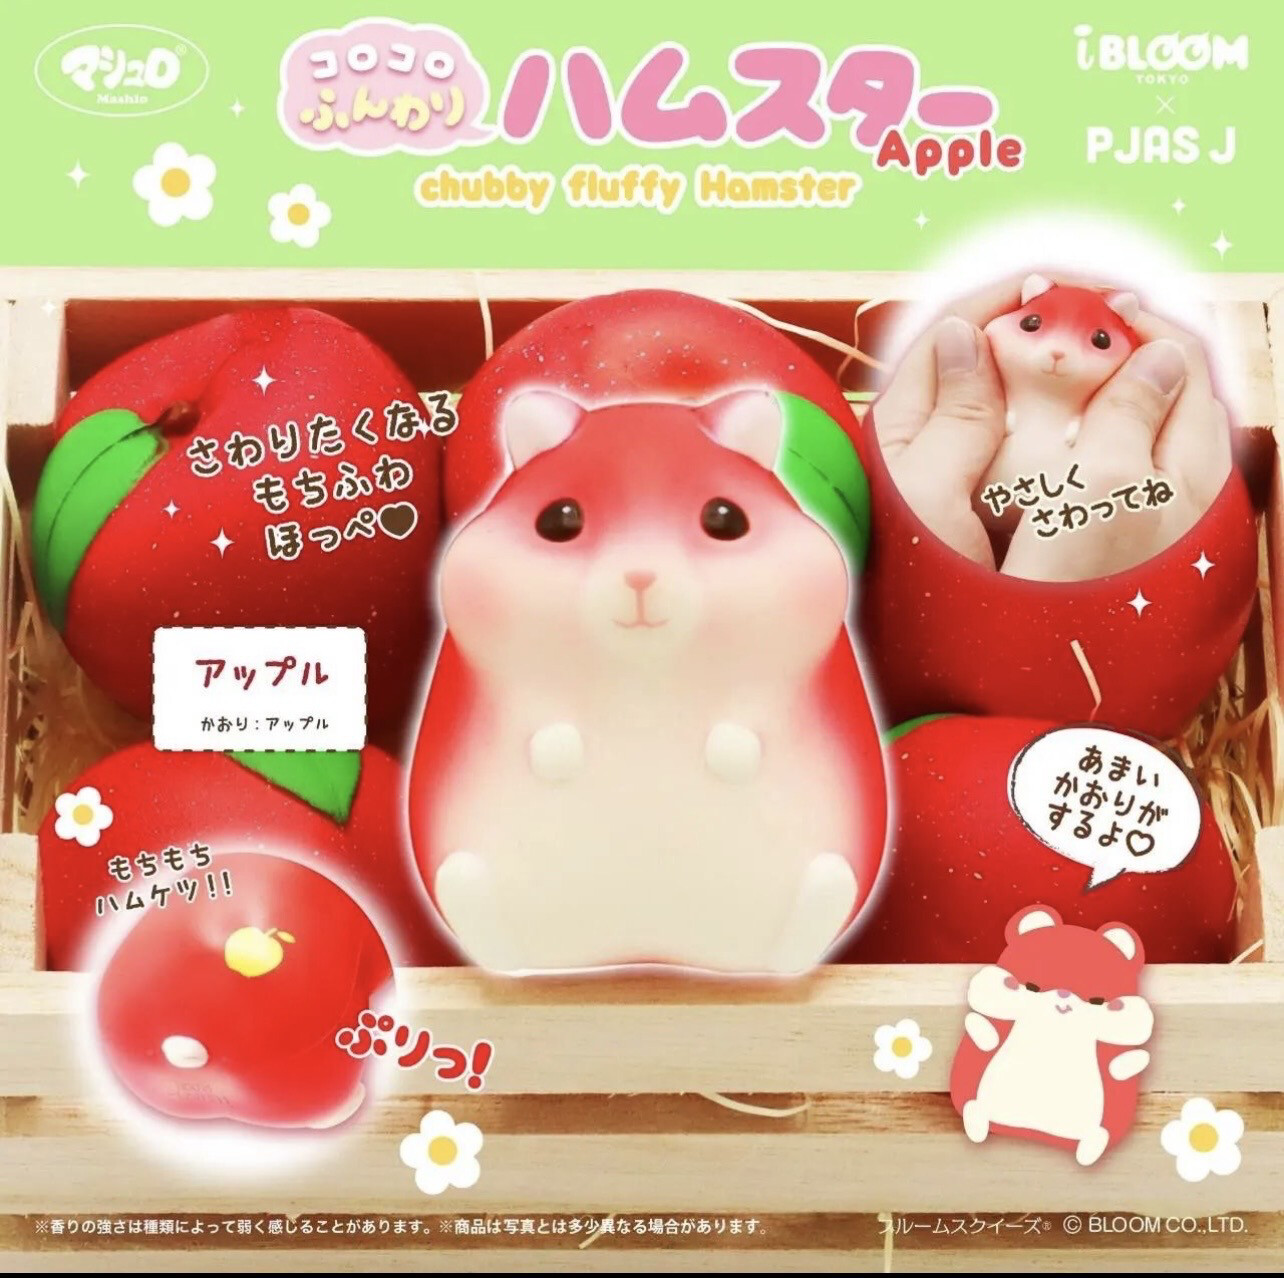 iBloom Apple Chubby Fluffy Hamster Squishy Limited Edition